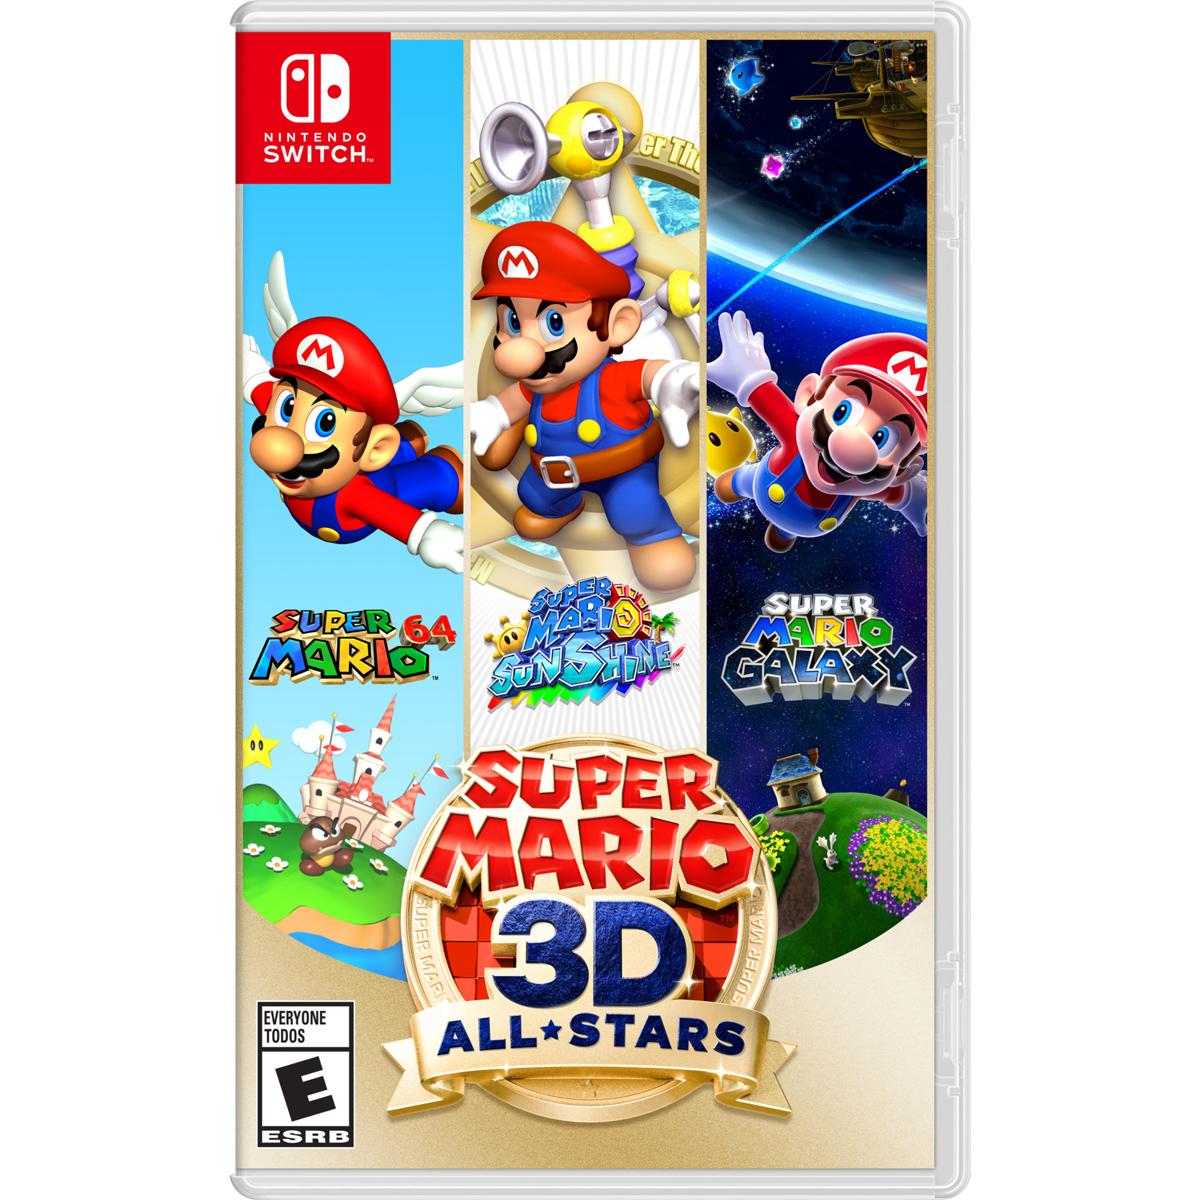 Super Mario 3D All-Stars Nintendo Switch for $49.94 Shipped